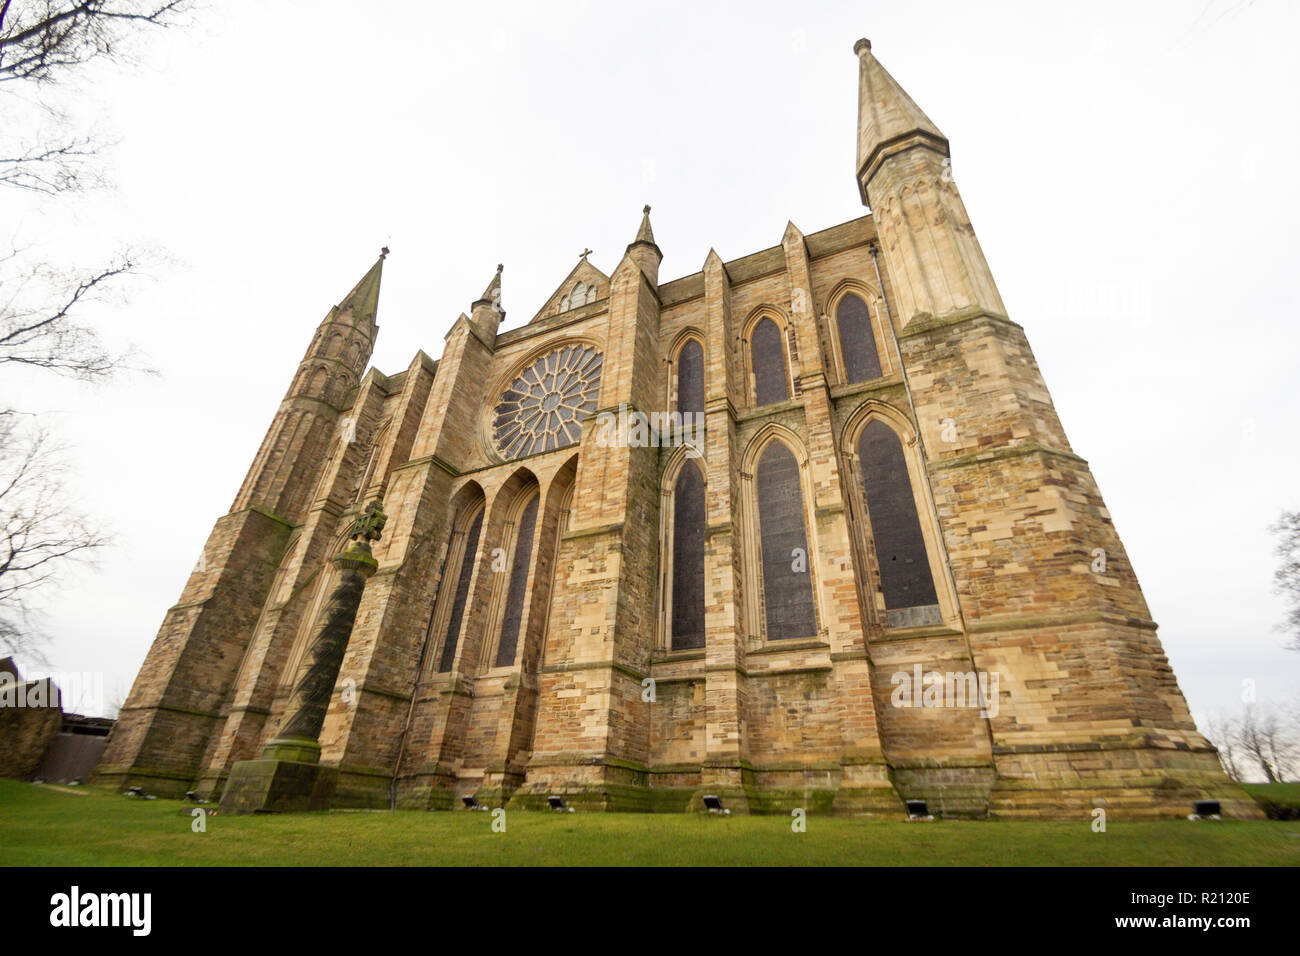 Durham/England - January 5th 2013: Wide angle photo of Durham cathedral Stock Photo